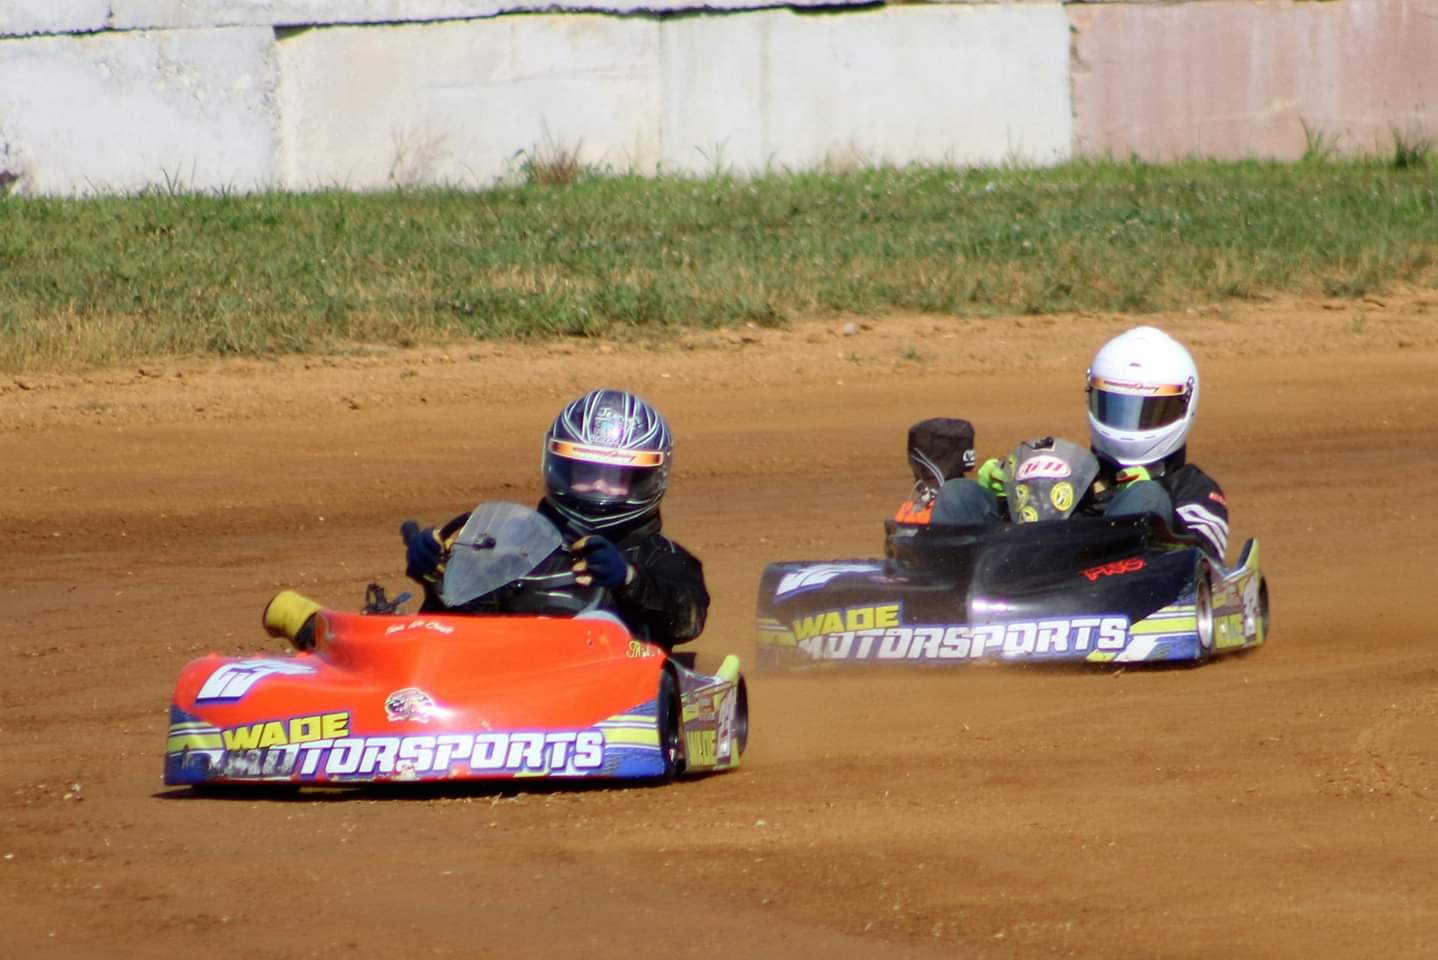 Jeremy wade in black kart and my son Michael wade in orange kart practicing for the races